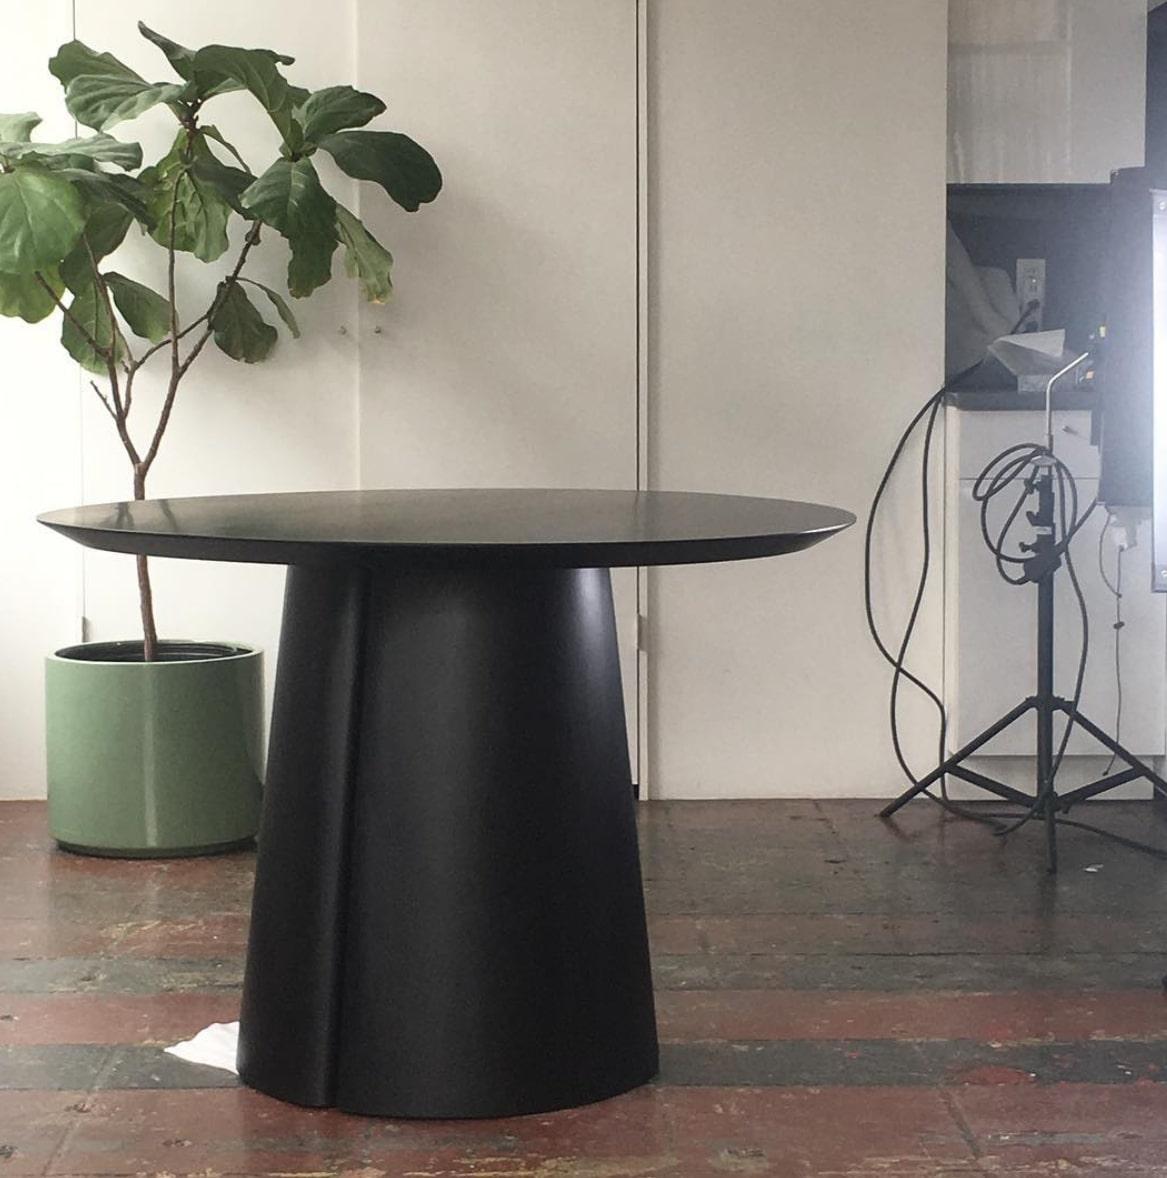 Wood Column Round Table by Black Table Studio, Maple, Represented by Tuleste Factory For Sale